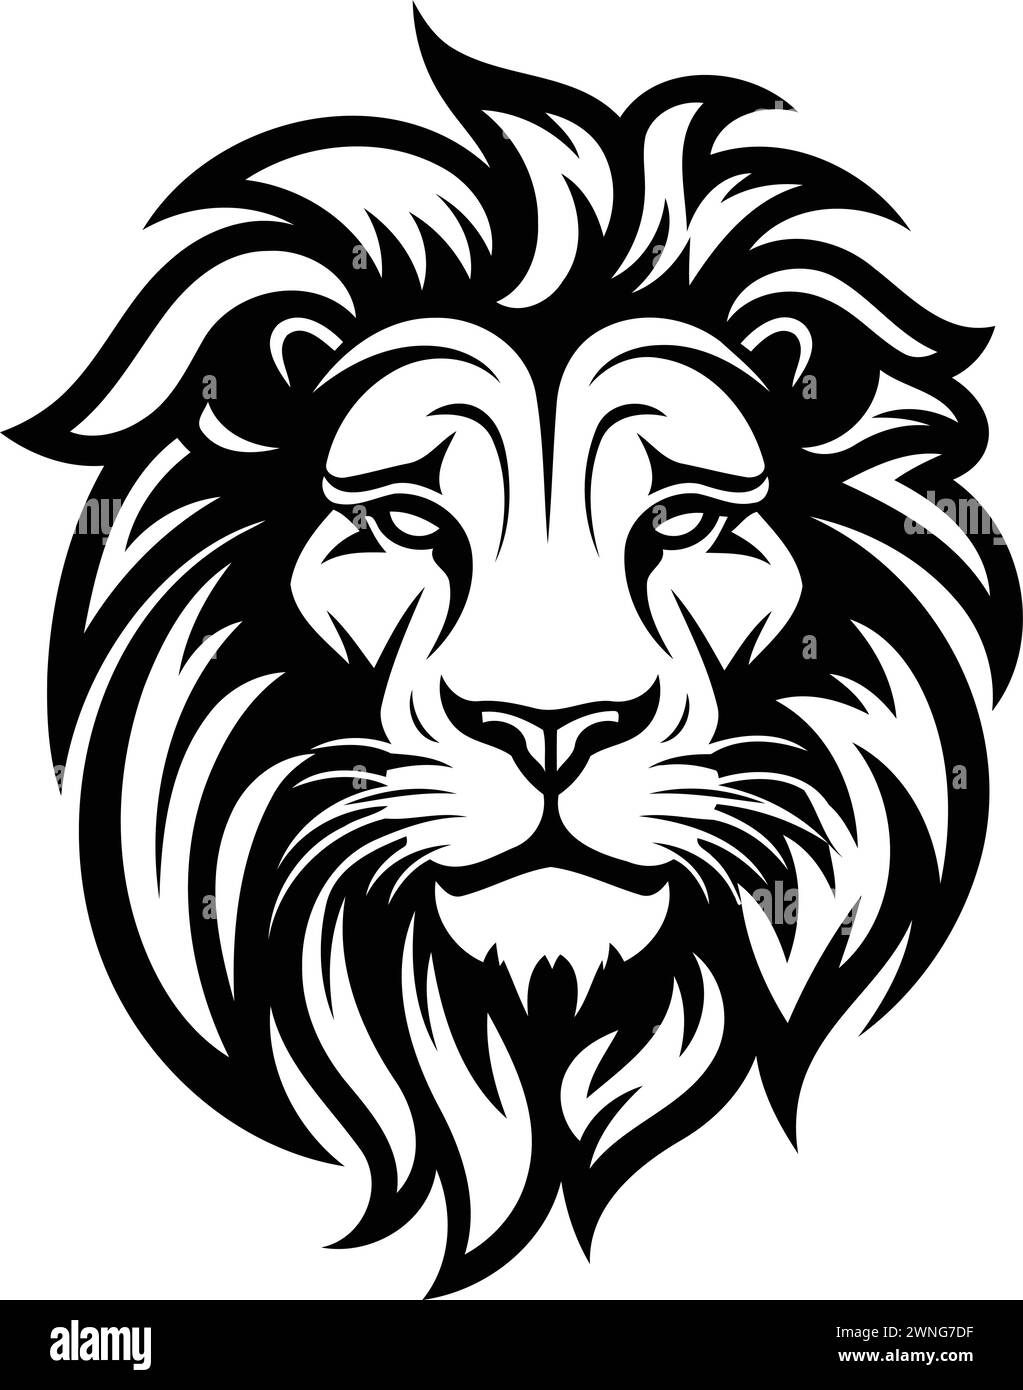 Lion head. Black and white vector illustration. Isolated on white background. Stock Vector